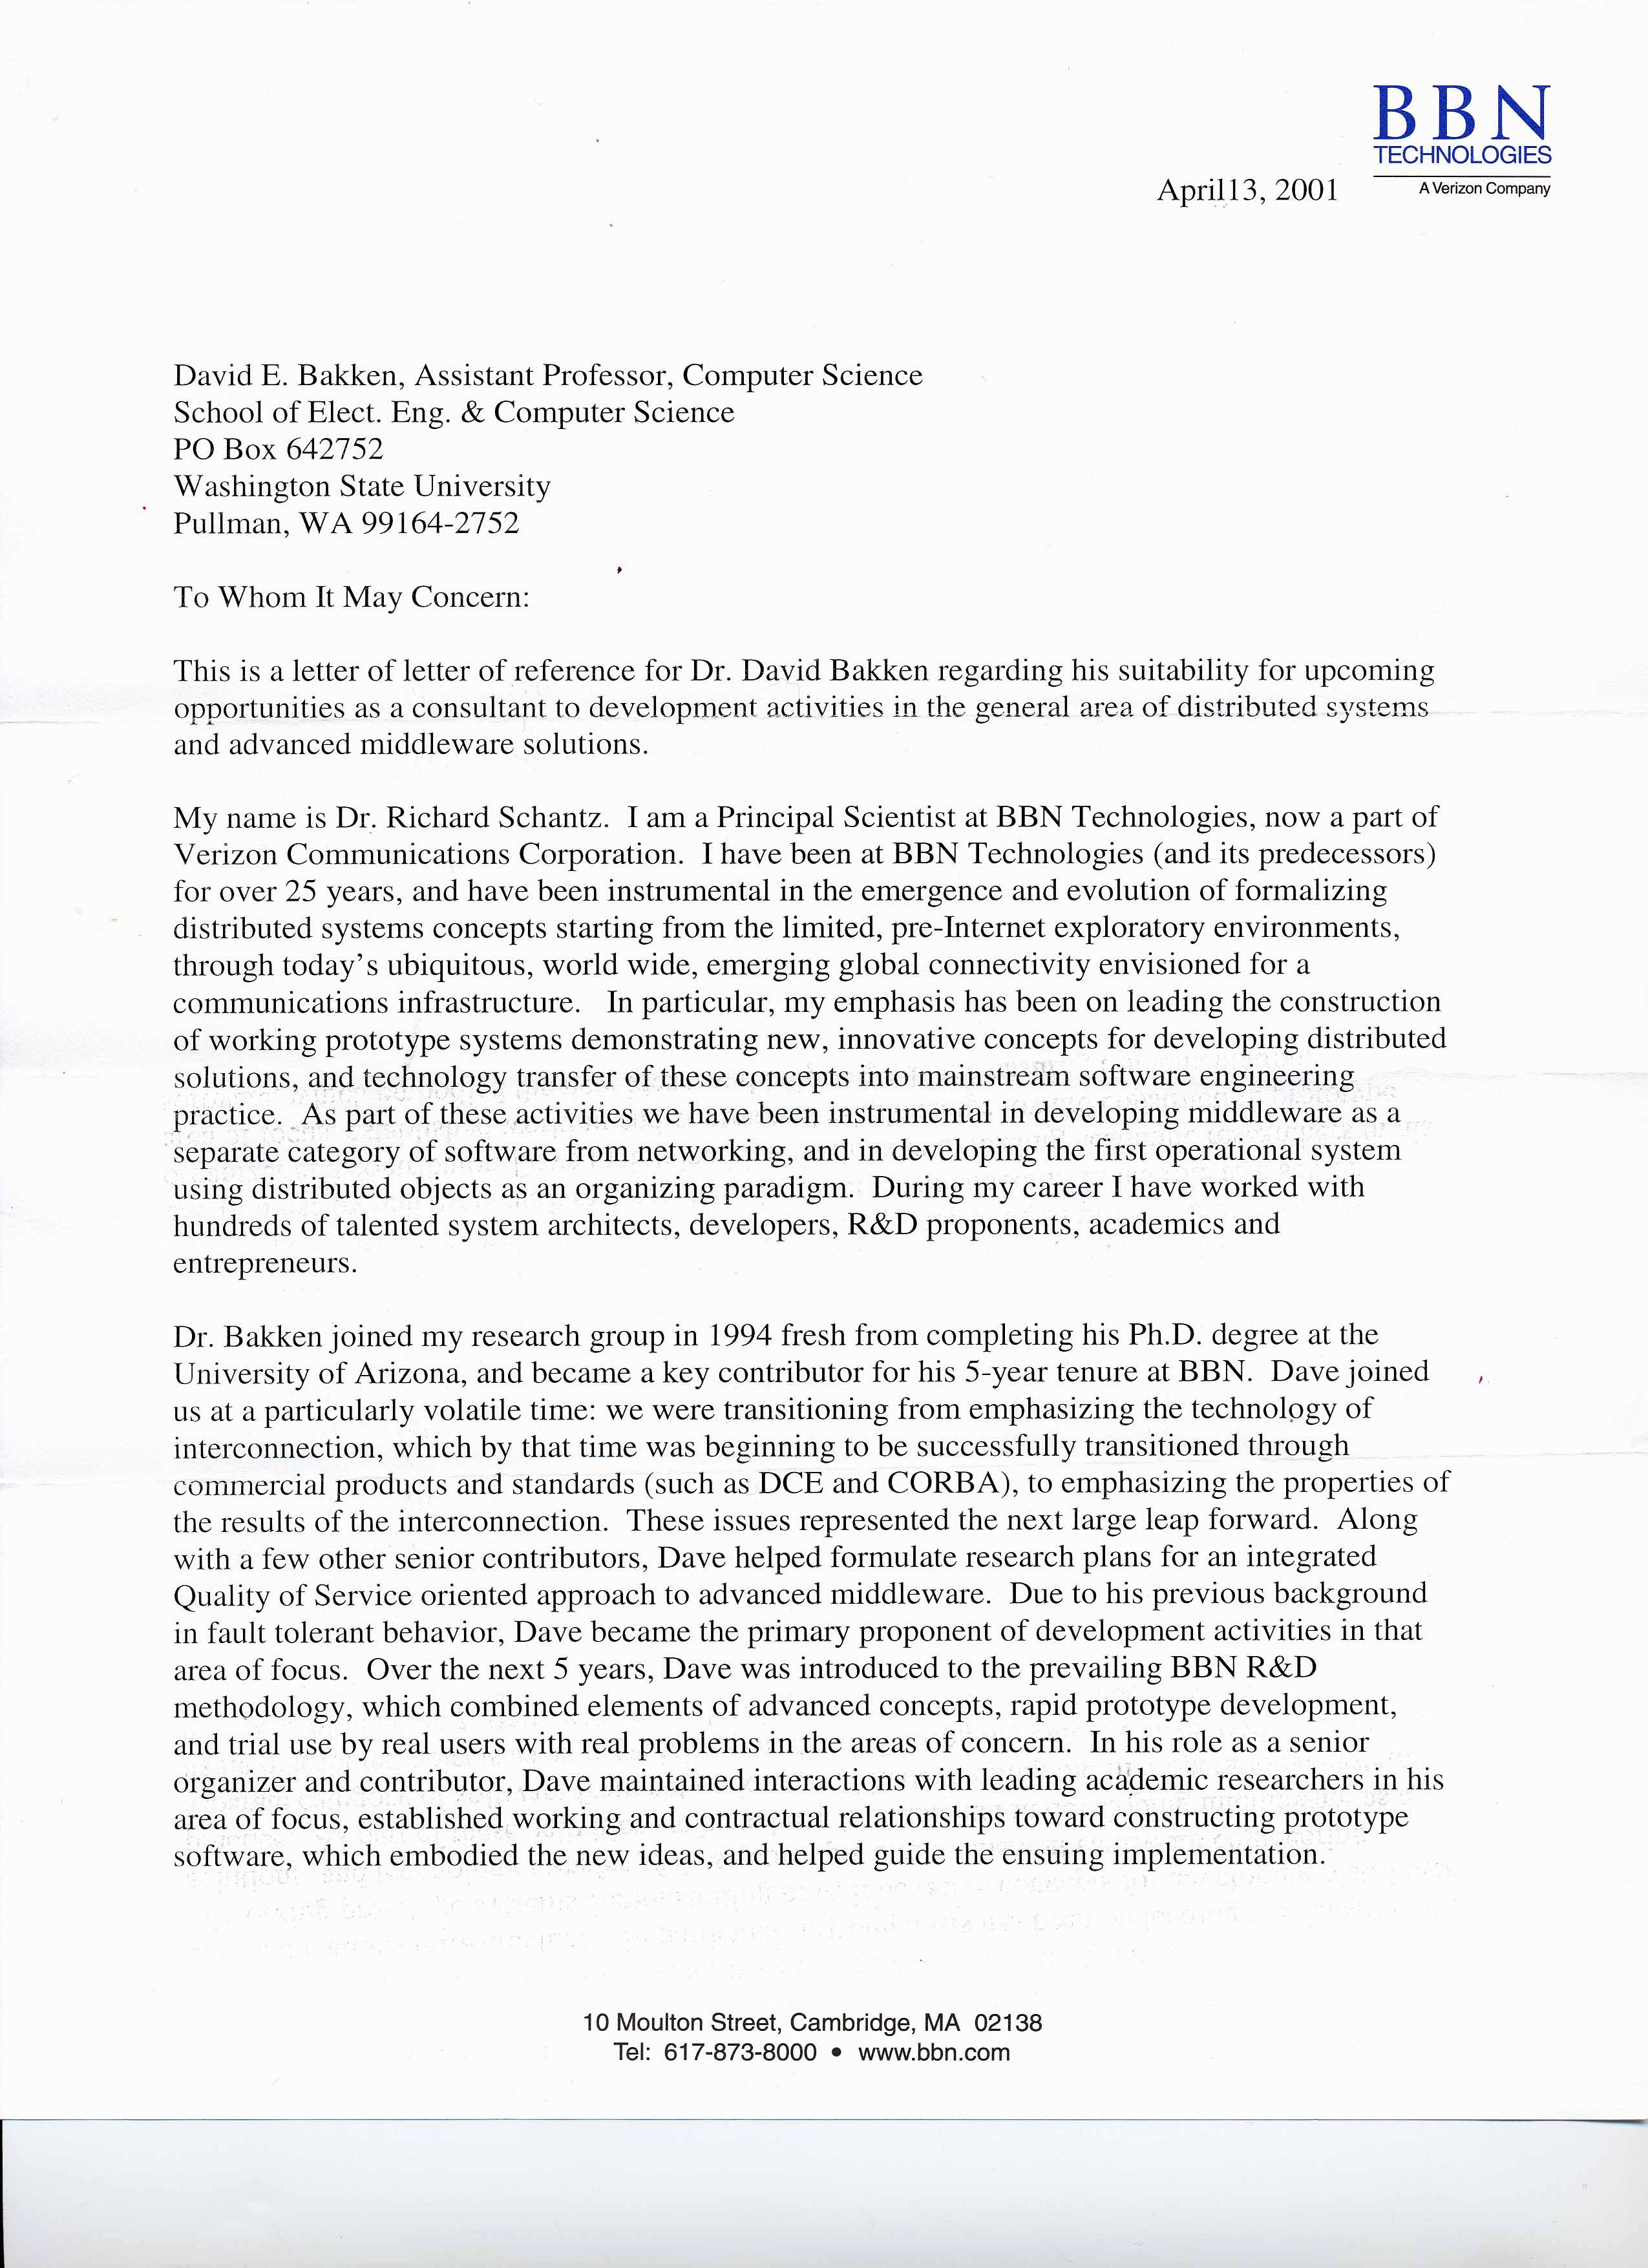 Uc Berkeley Letter Of Recommendation Unique Consulting Letters Of Reference for Dr